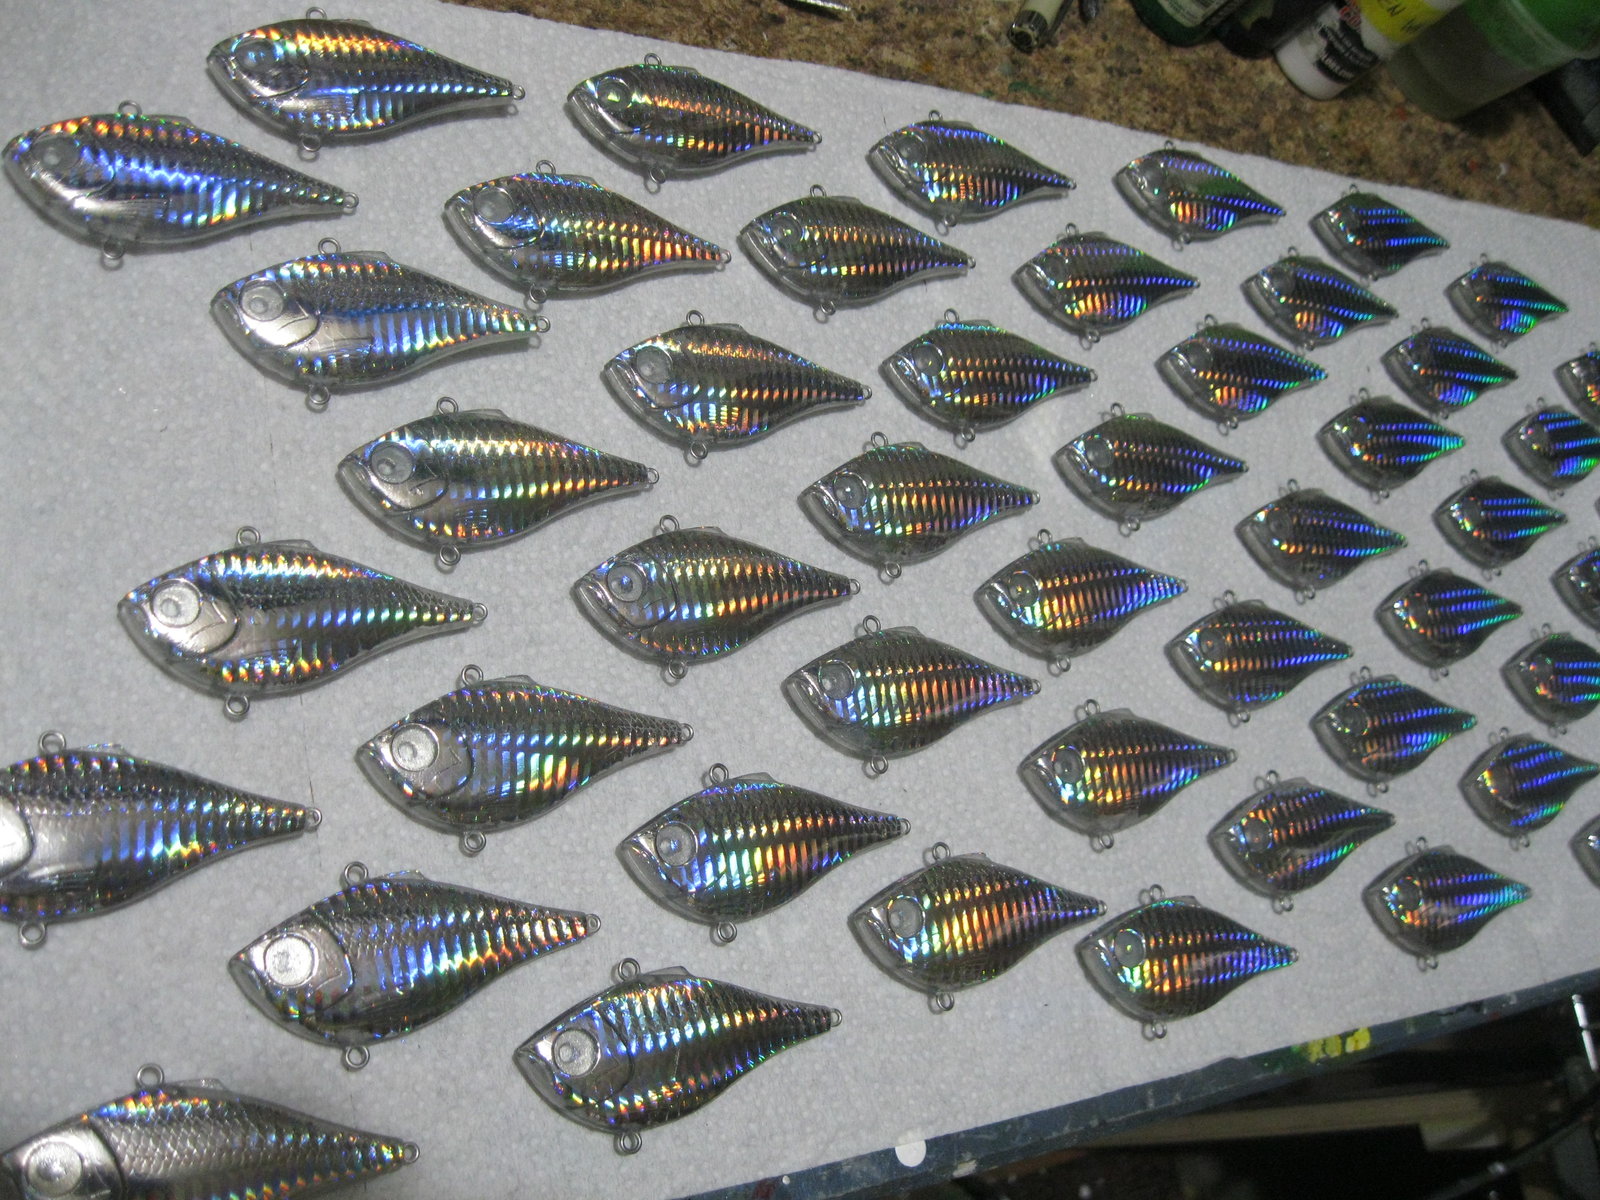 Holographic foil on some lipless blanks. - Hard Baits -   - Tackle Building Forums